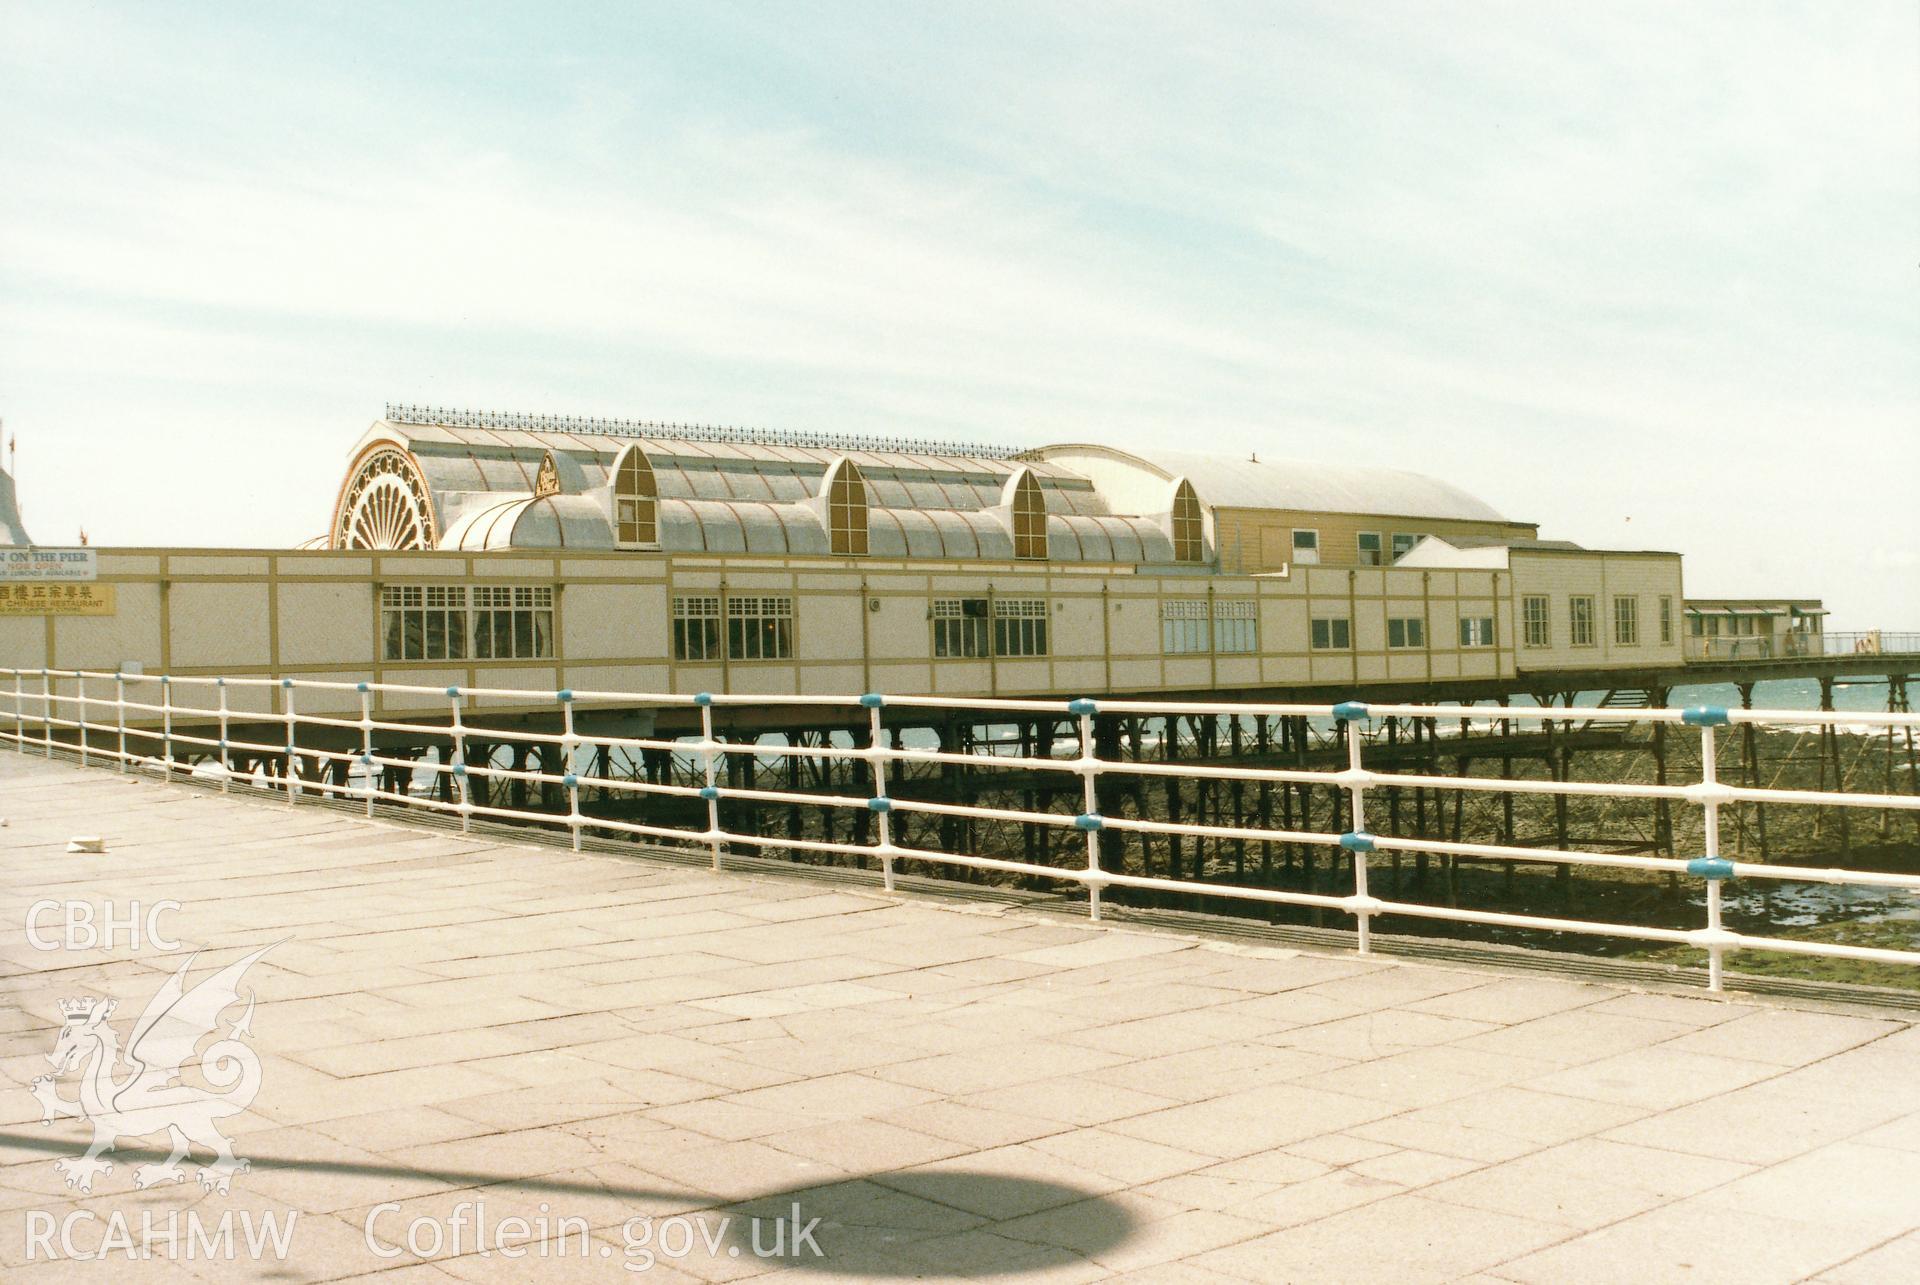 Cadw colour photo of Aberystwyth Pier and Pavilion. No negative held.